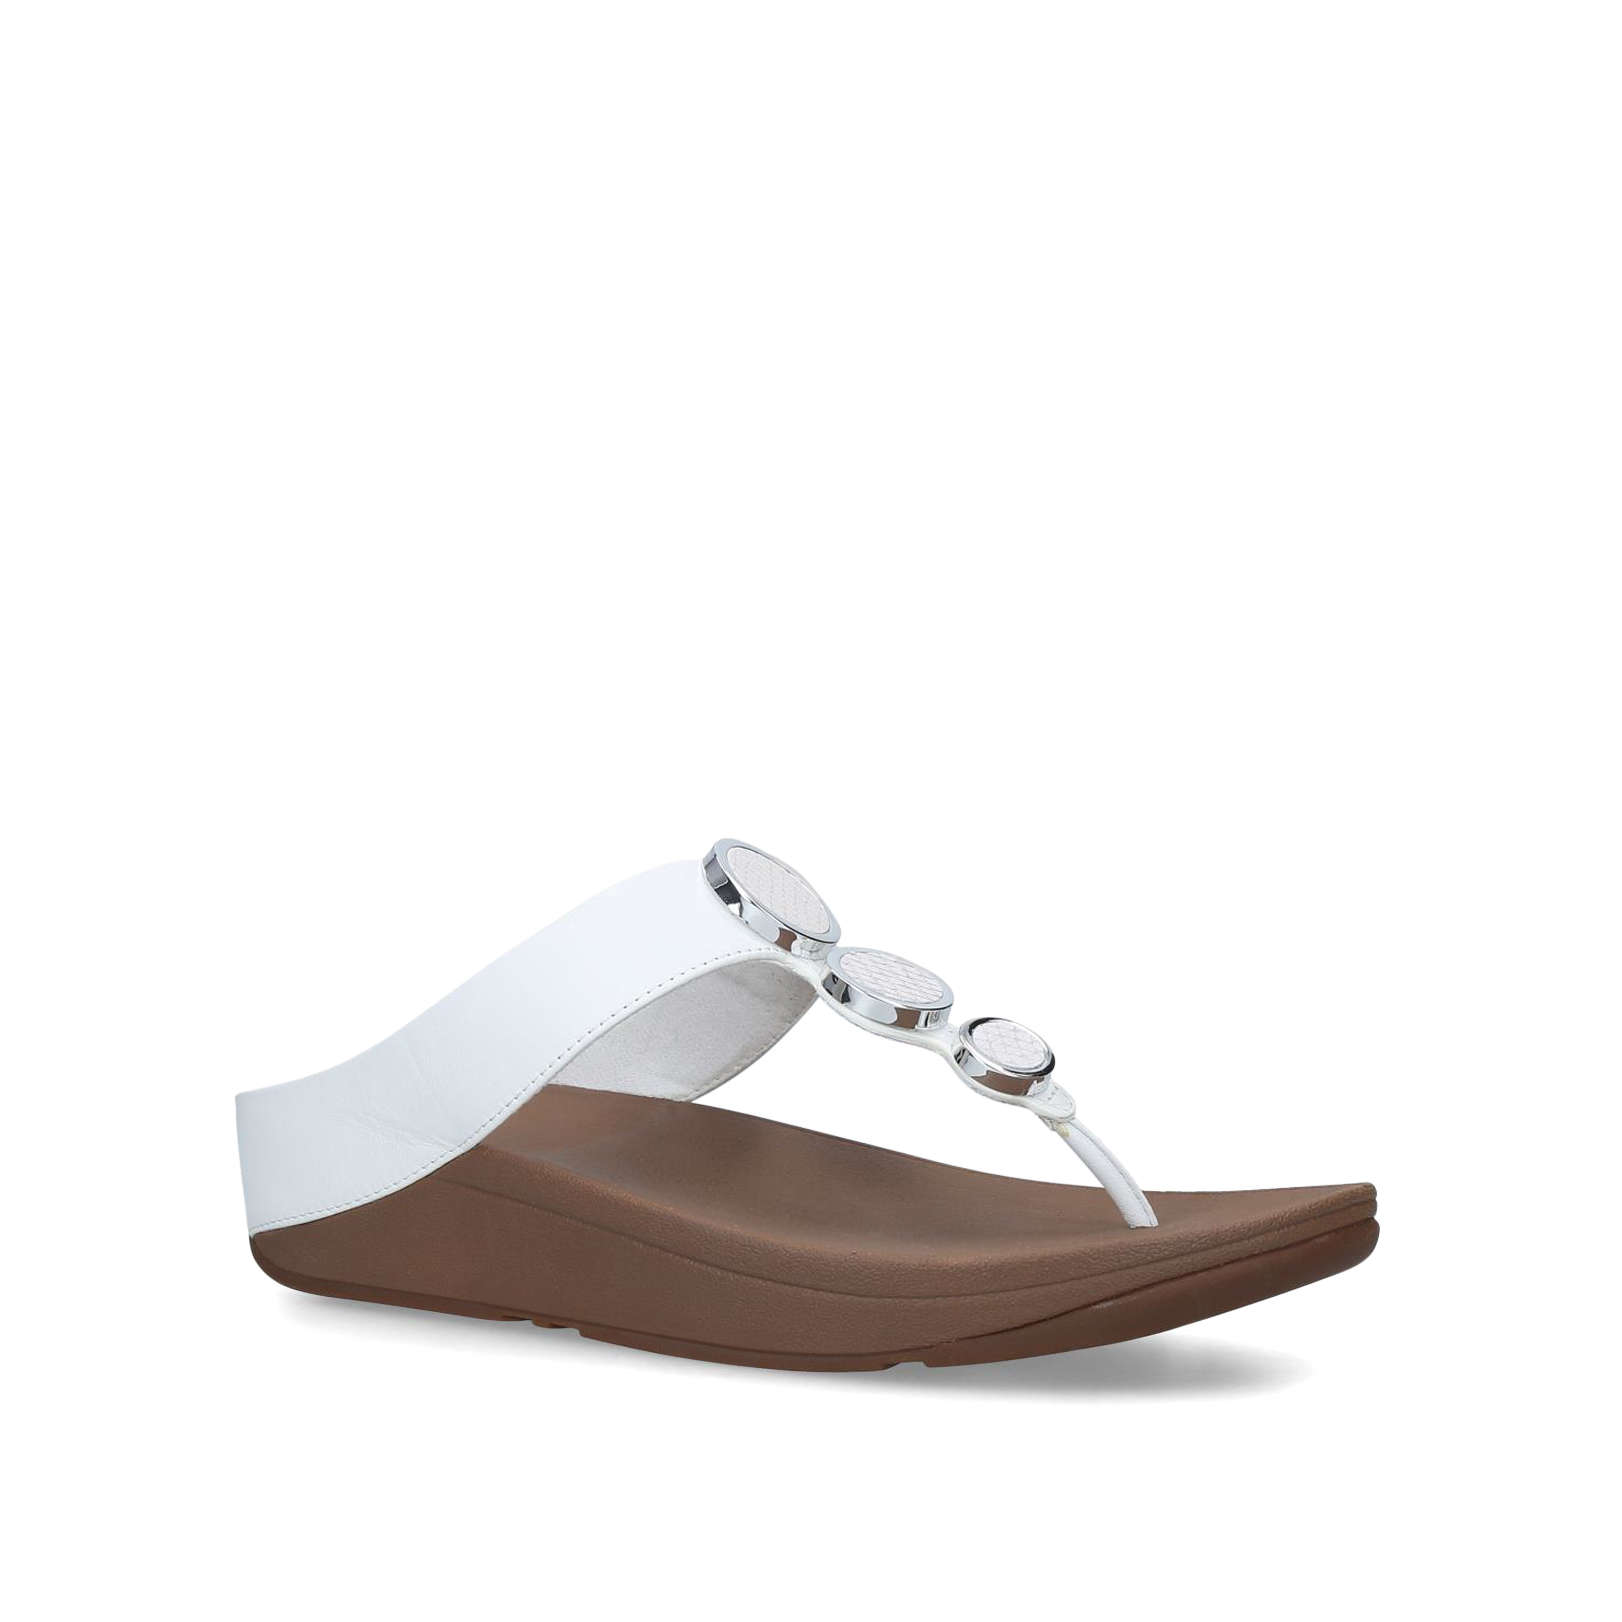 I42 HALO - FITFLOP Summer